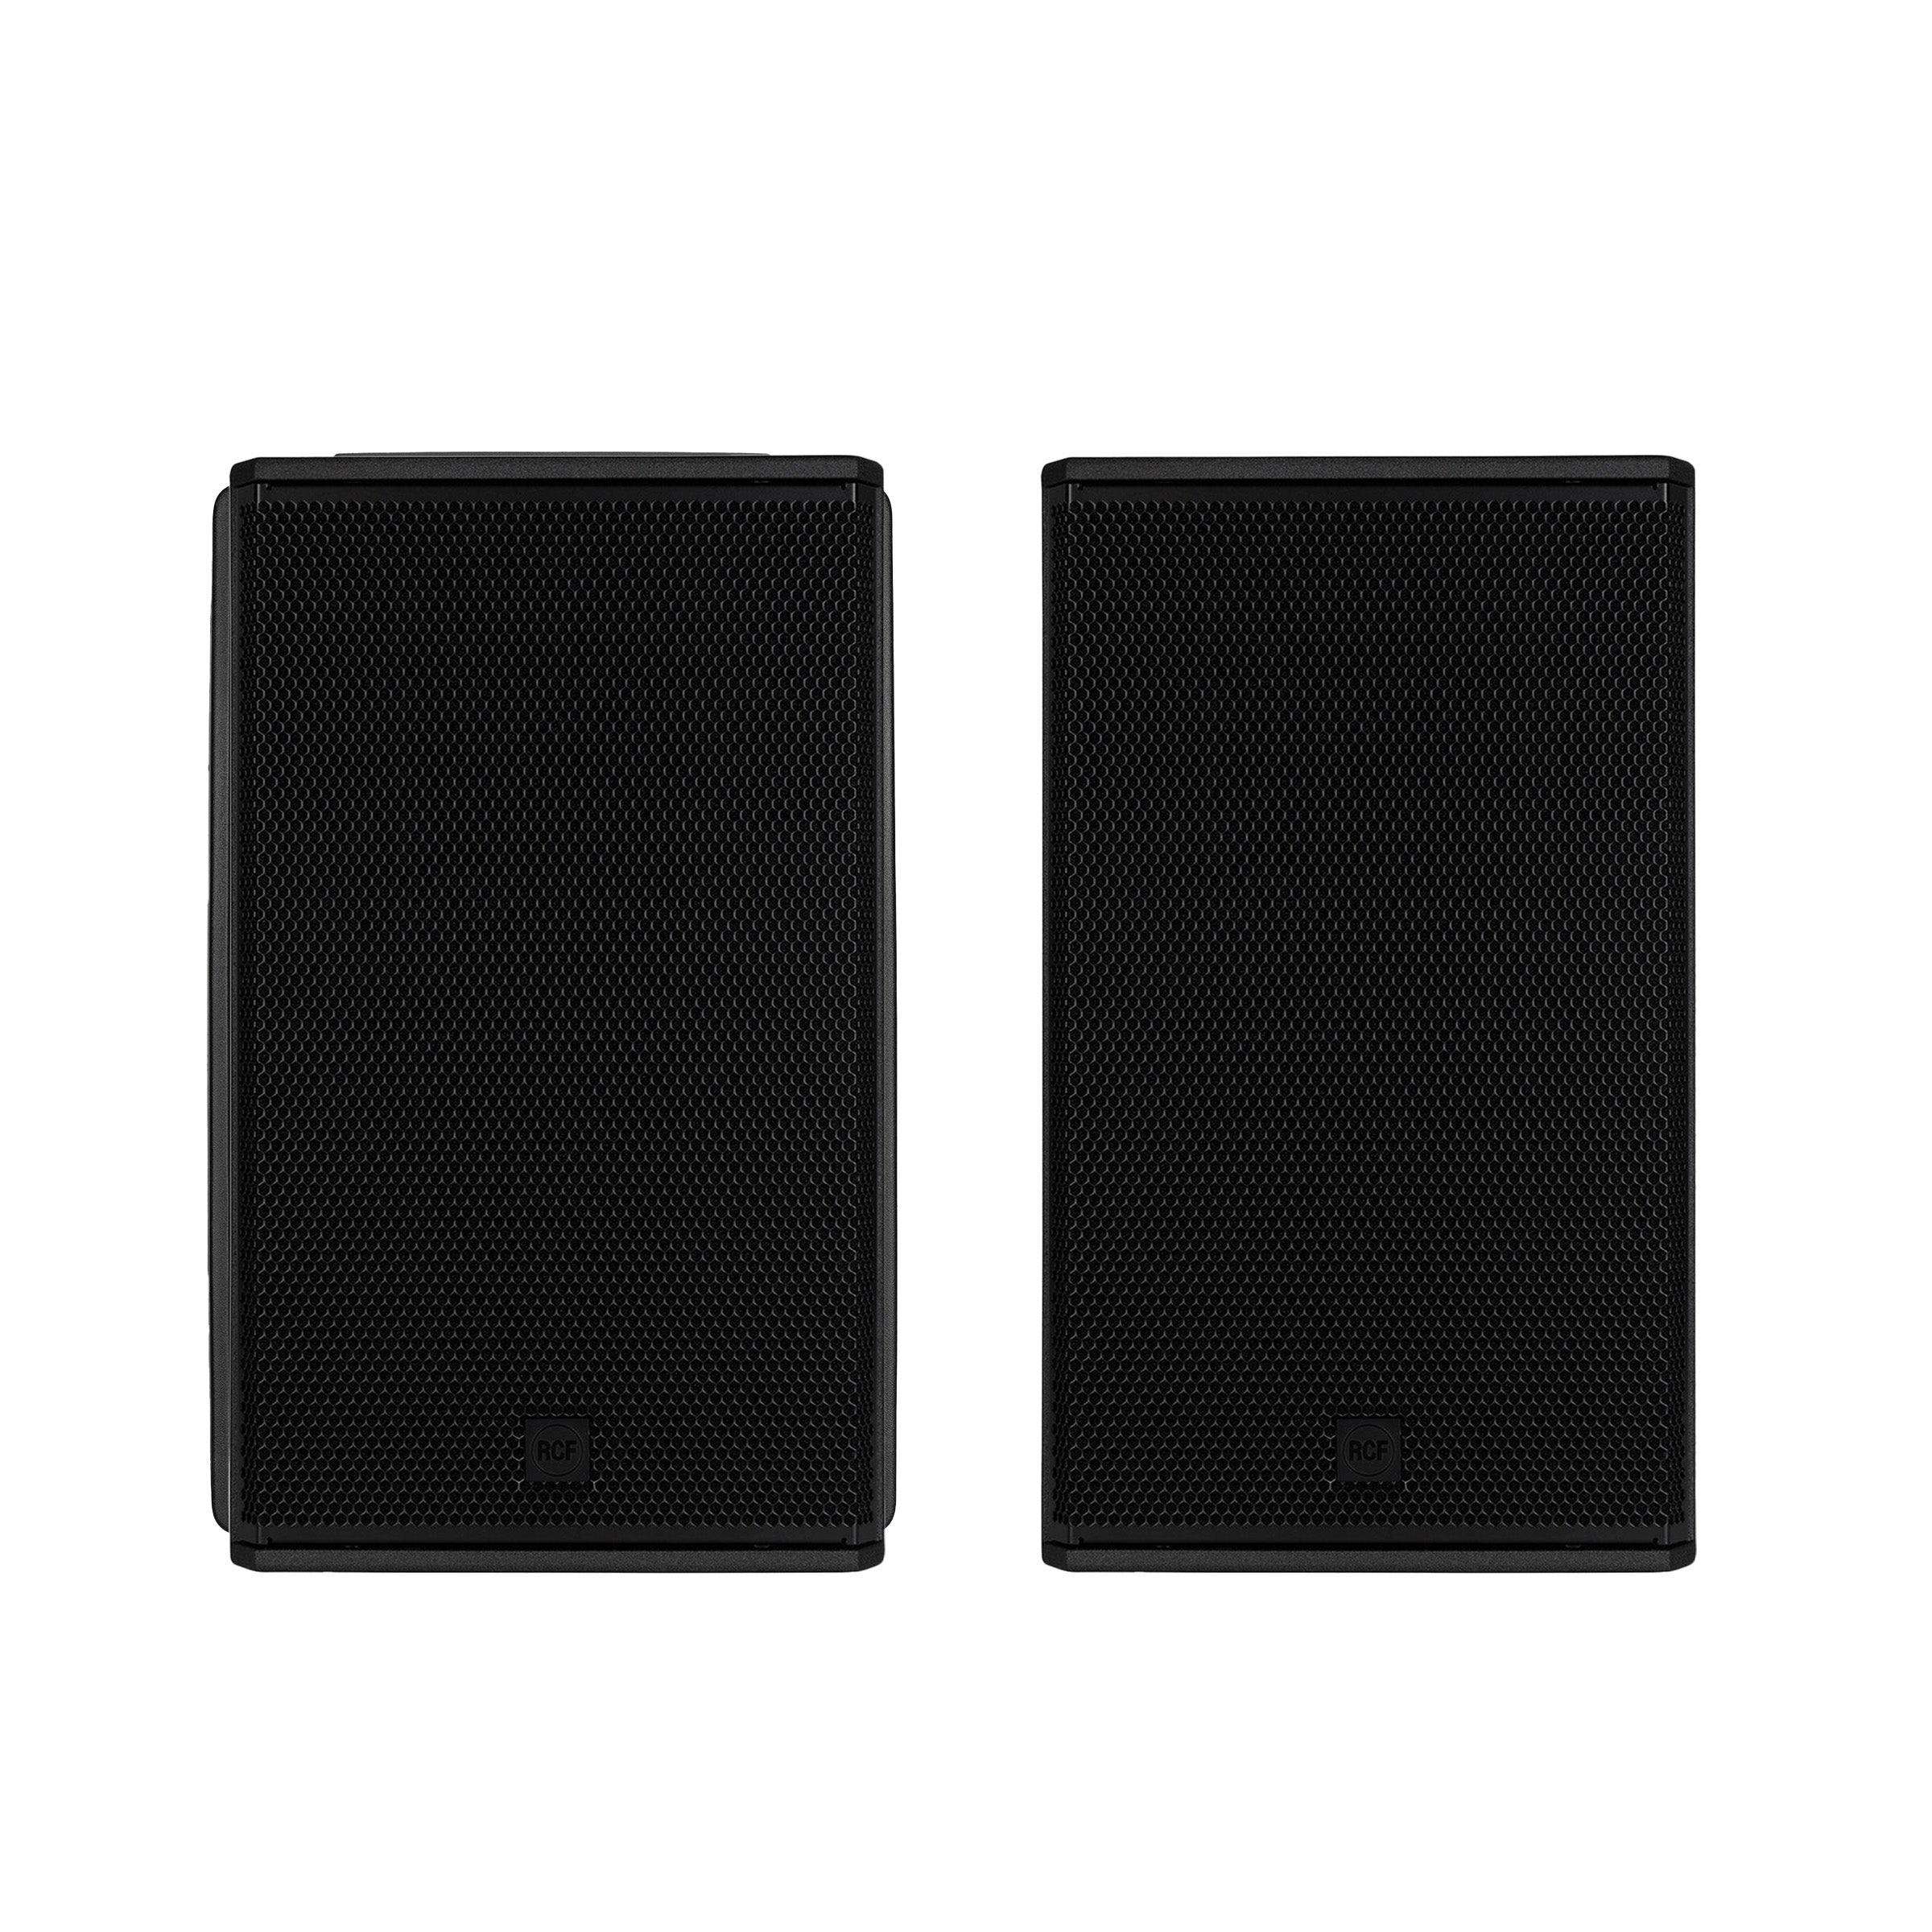 RCF NX 915-A Two Way Active PA Speaker (Pair)